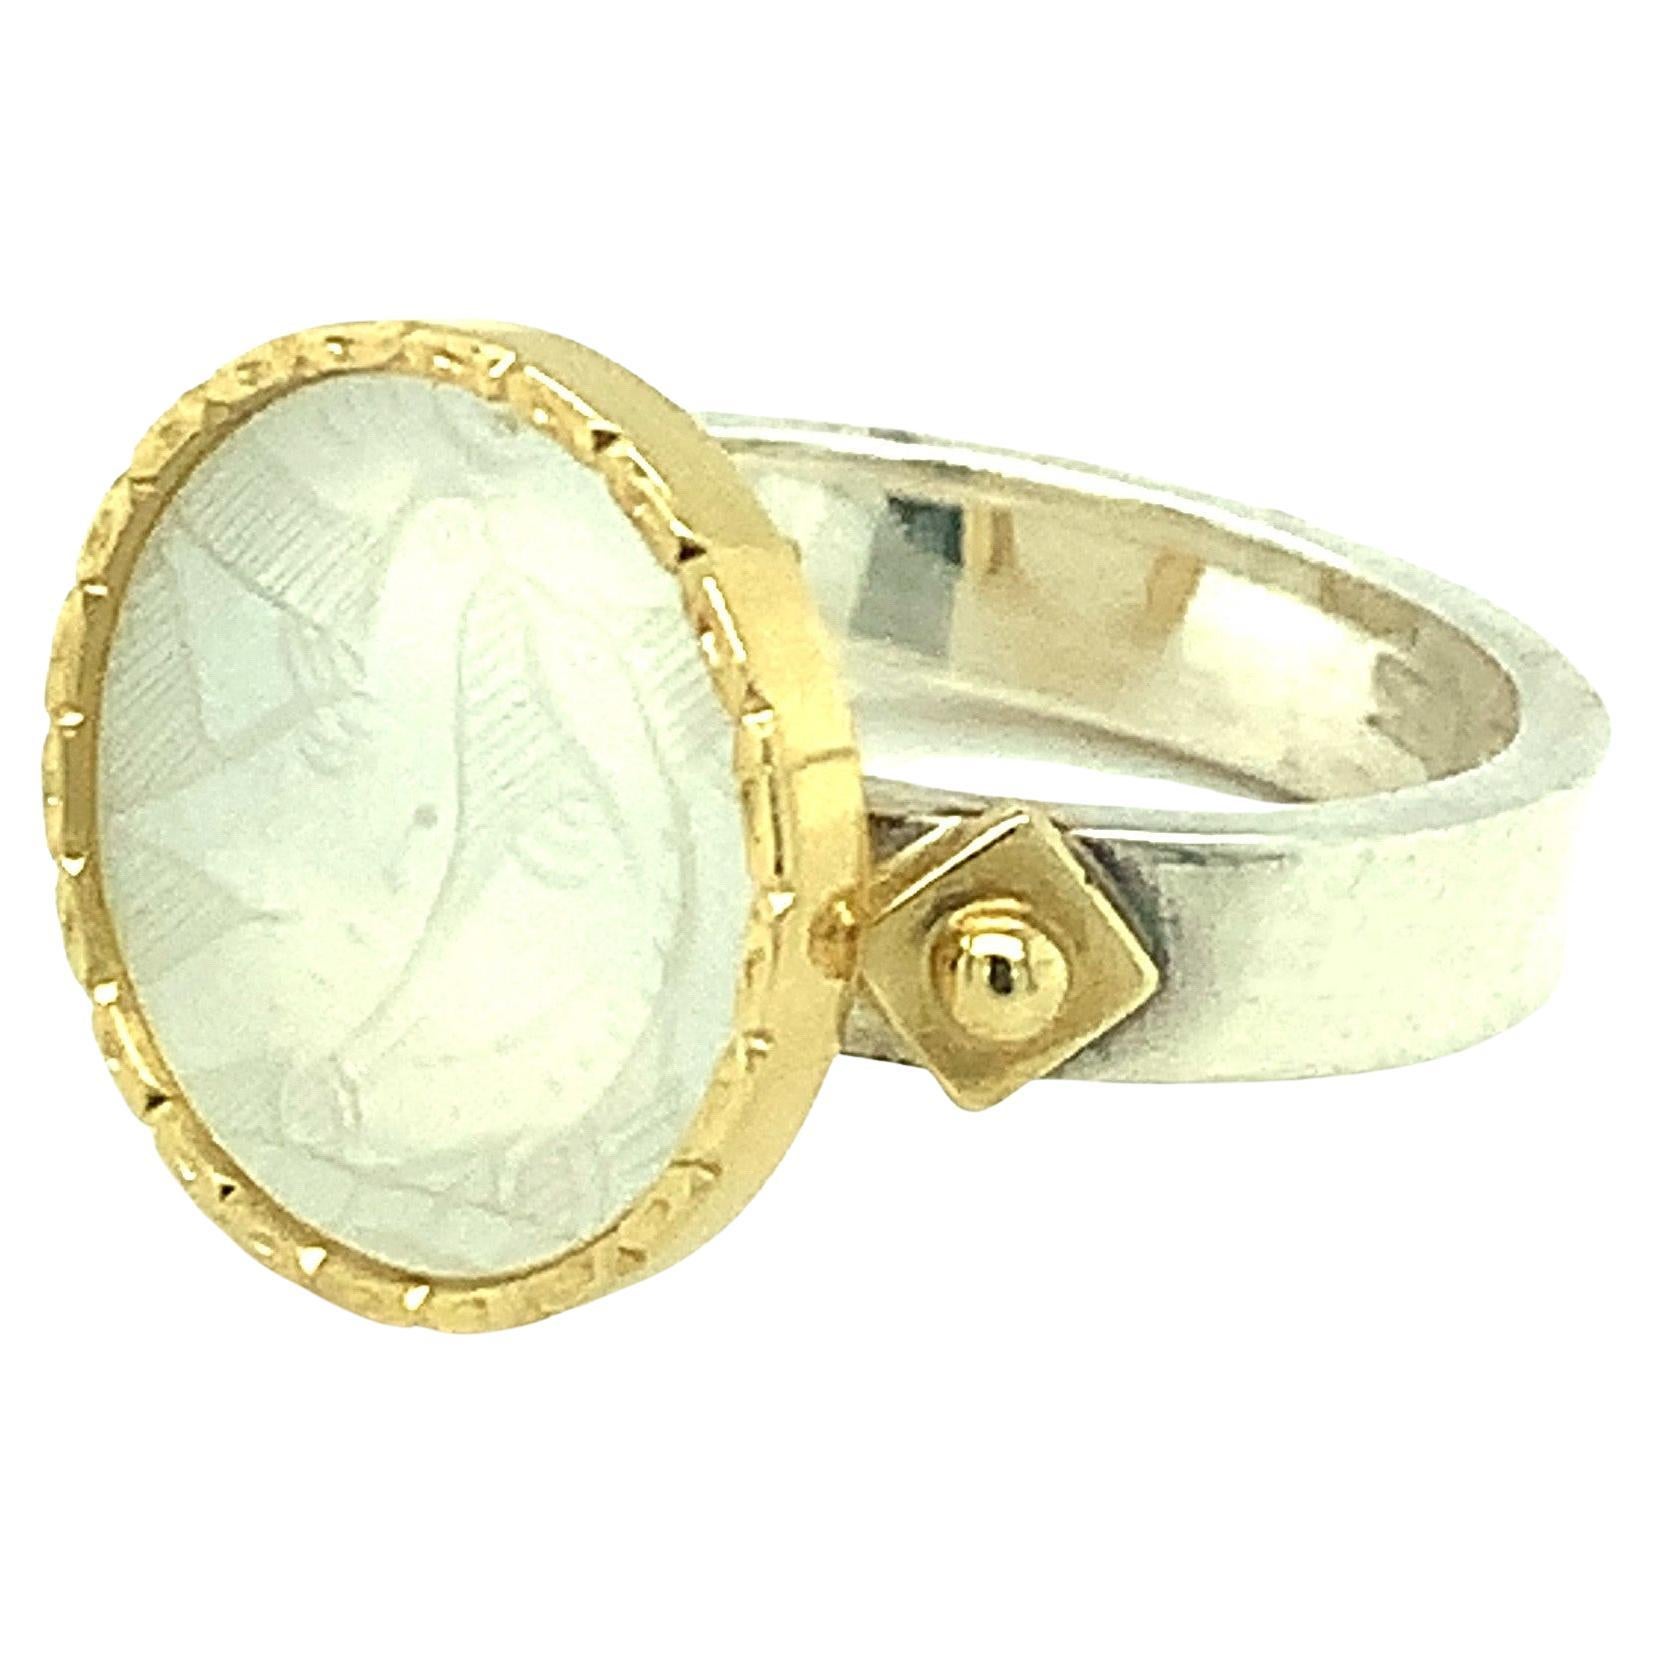 This ring features an antique, mother-of-pearl Chinese gambling counter with motifs dating back to the 18th century. The counter was originally carved in China for export to Britain. The British used these mother of pearl pieces much like we would